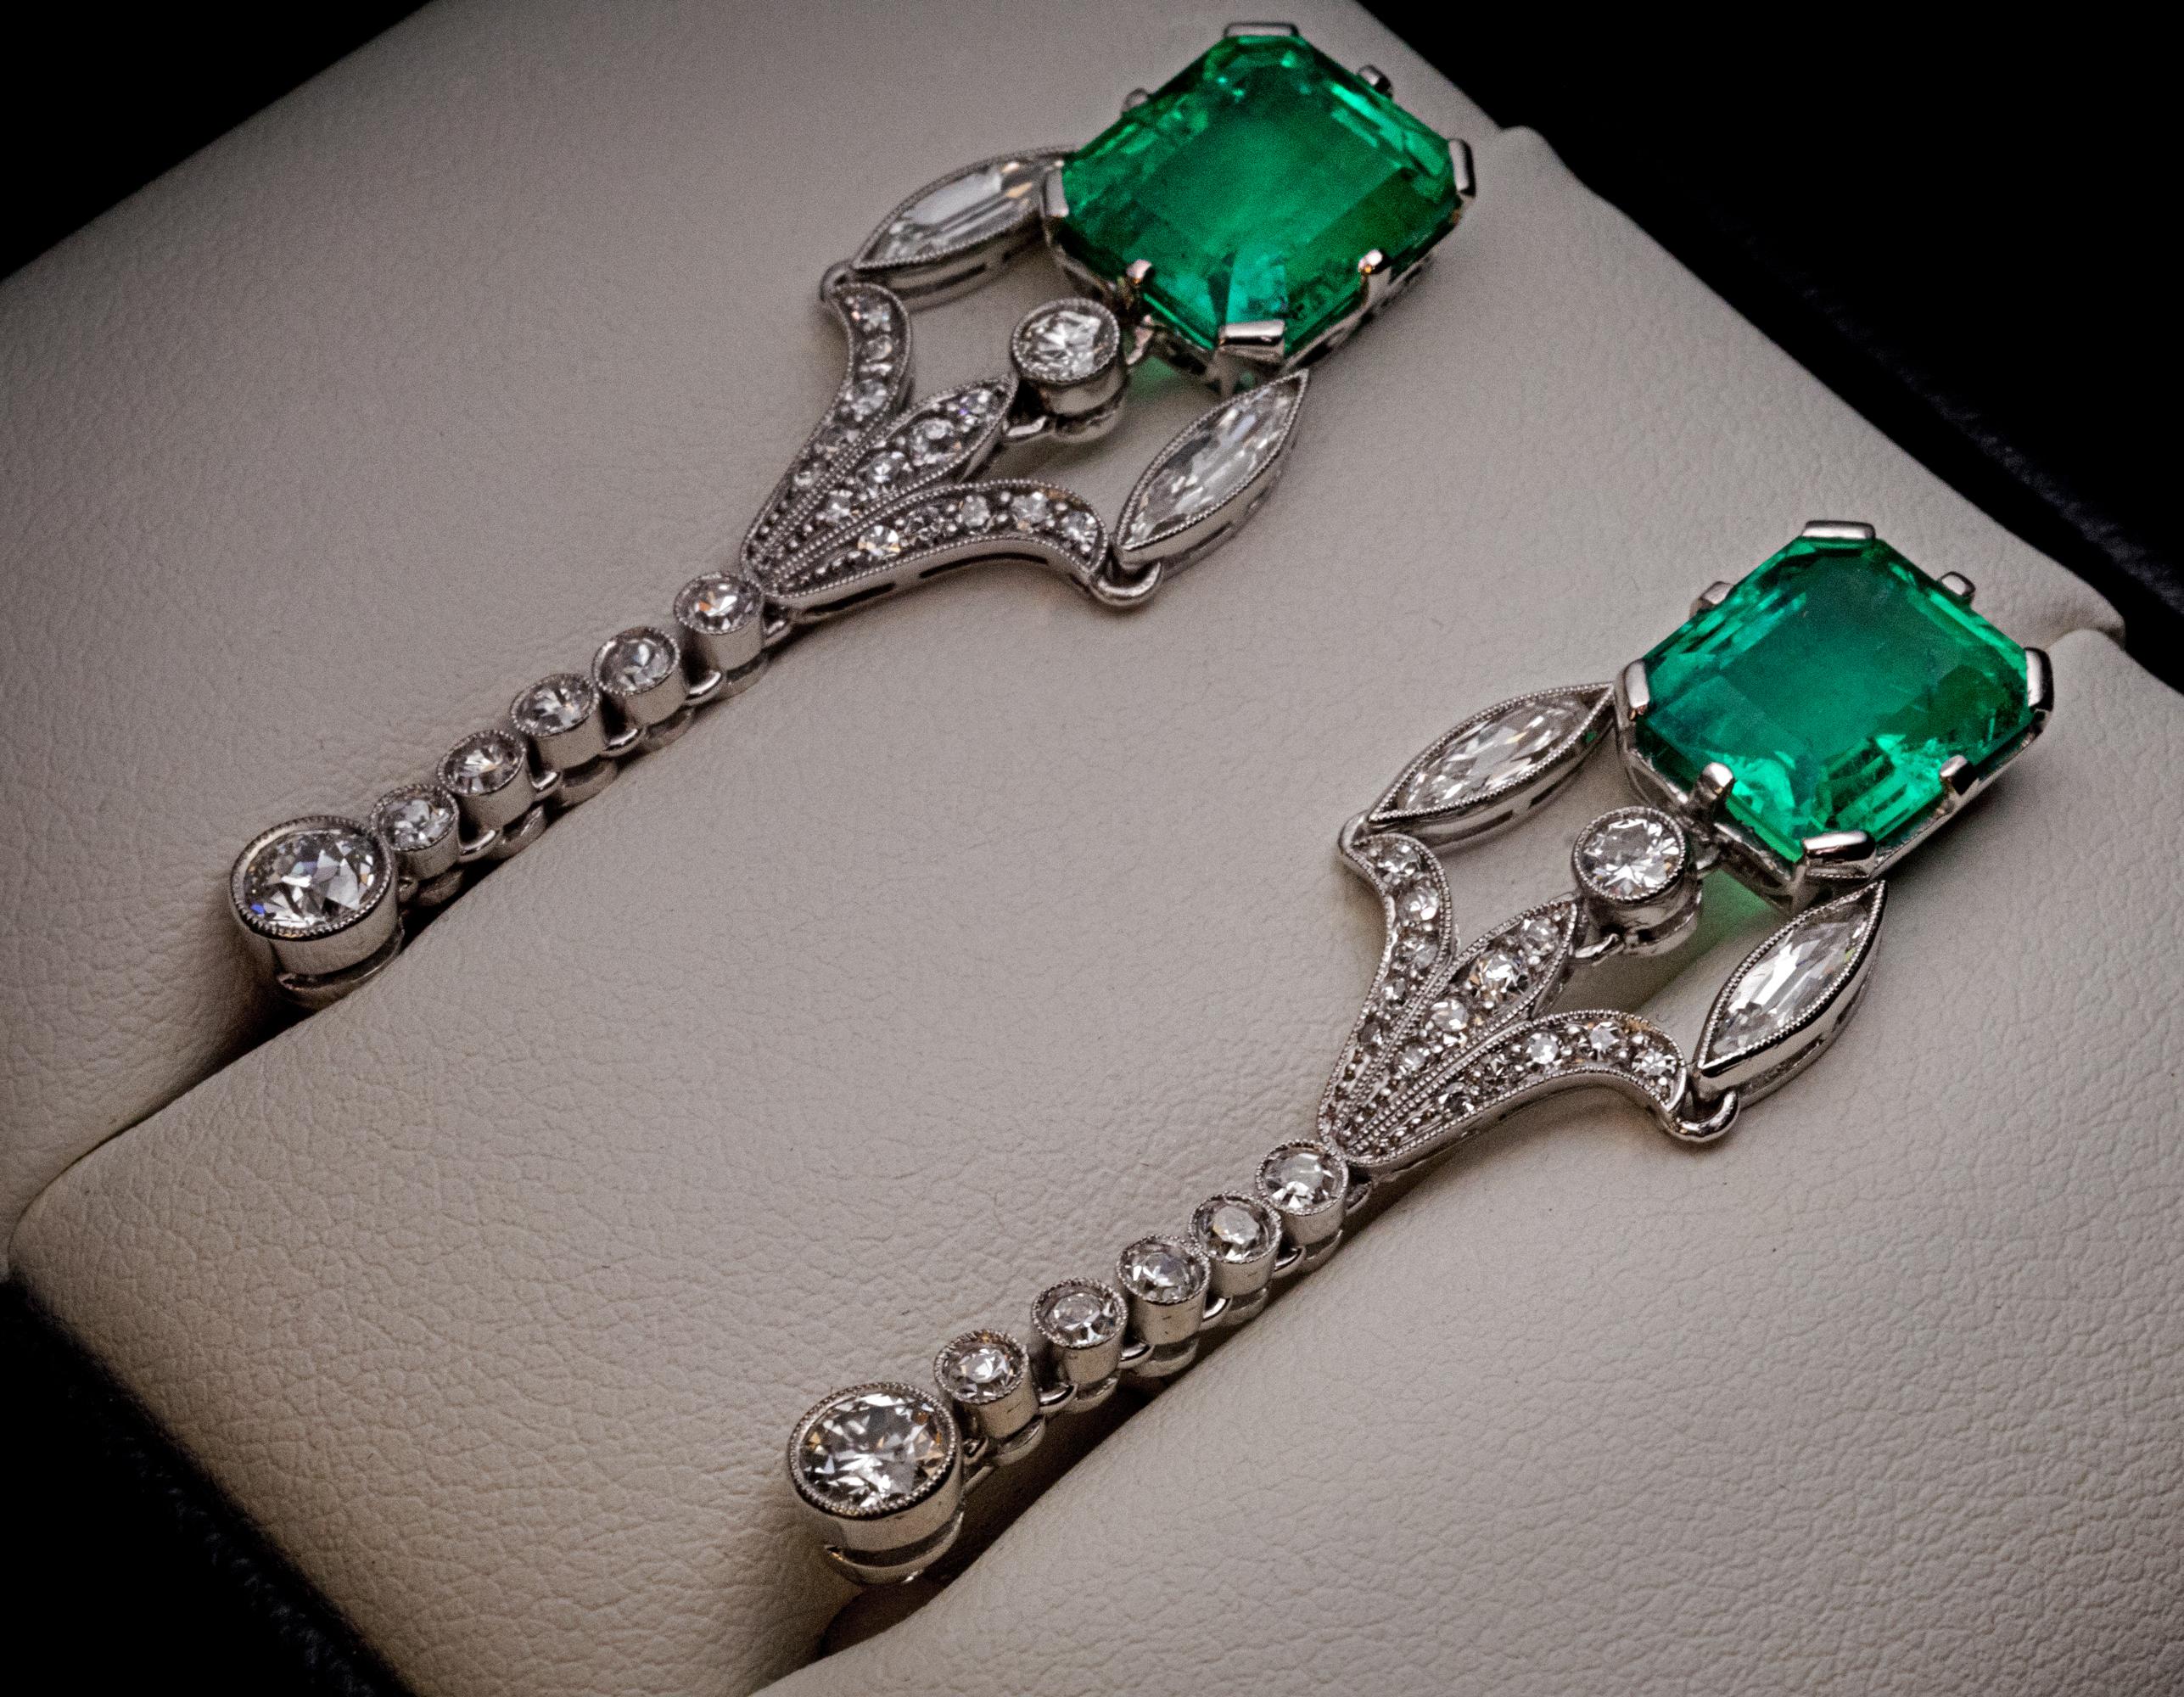 Circa 1920s

These Art Deco era elegant ear pendants are handcrafted in platinum. They feature two Colombian emeralds of excellent color, clarity and sparkle. The emeralds are accented by round and marquise shaped old cut diamonds.

The earrings are